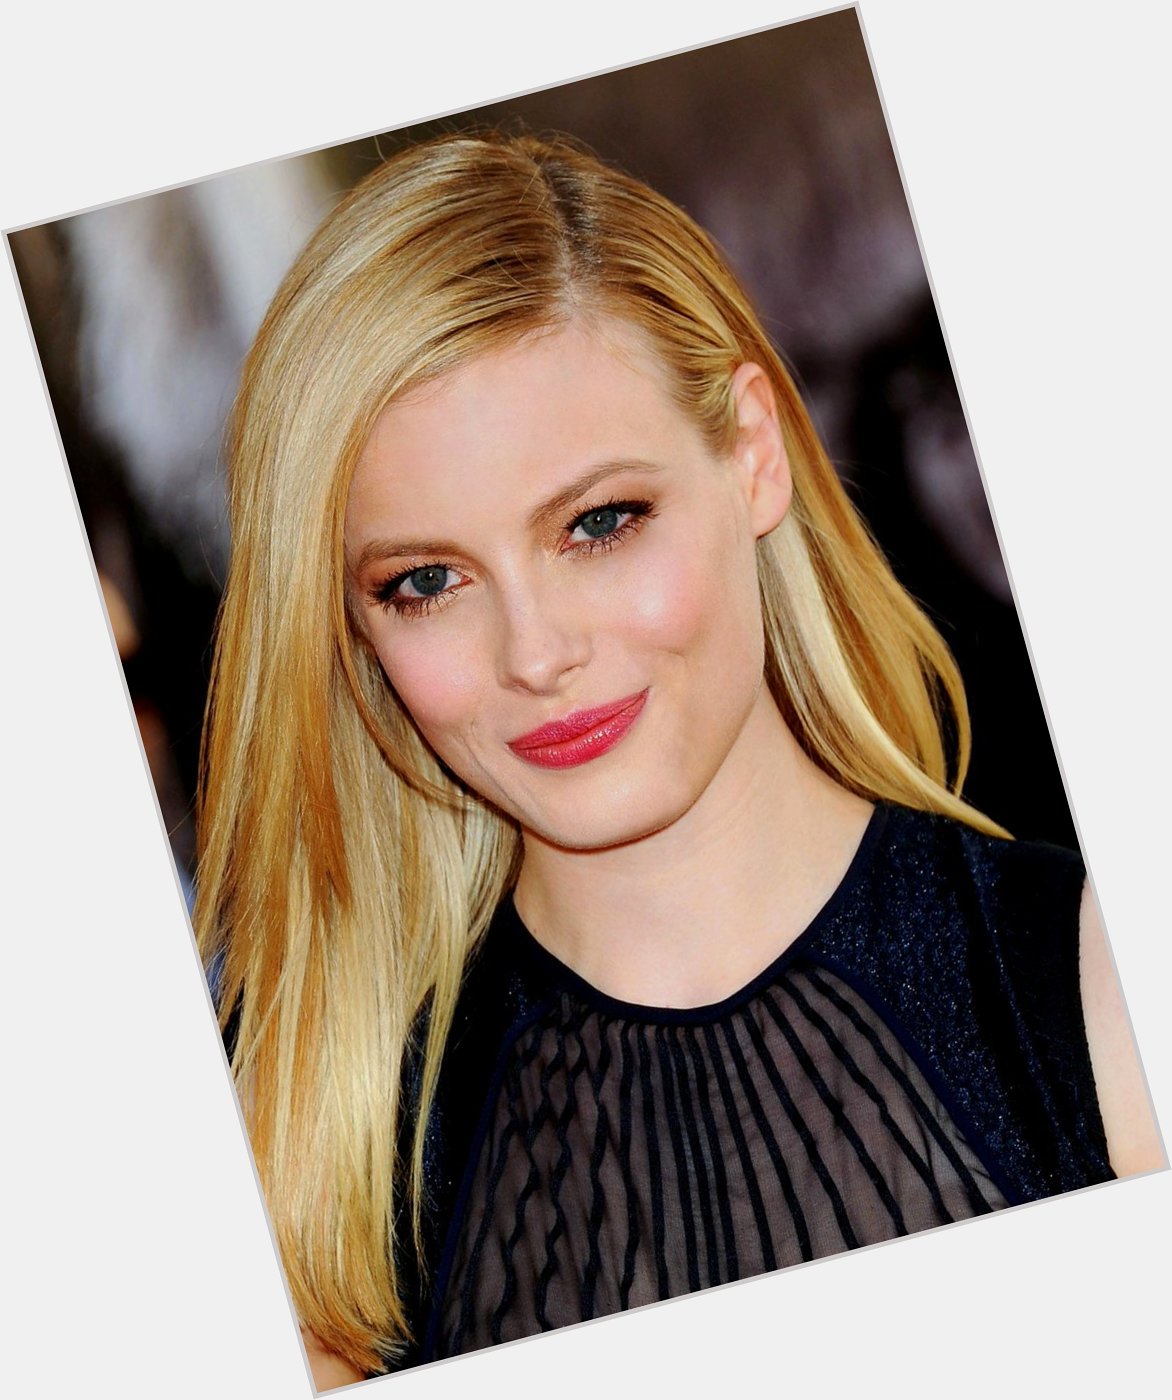 Gillian Jacobs October 19 Sending Very Happy Birthday Wishes! All the Best! Cheers! 